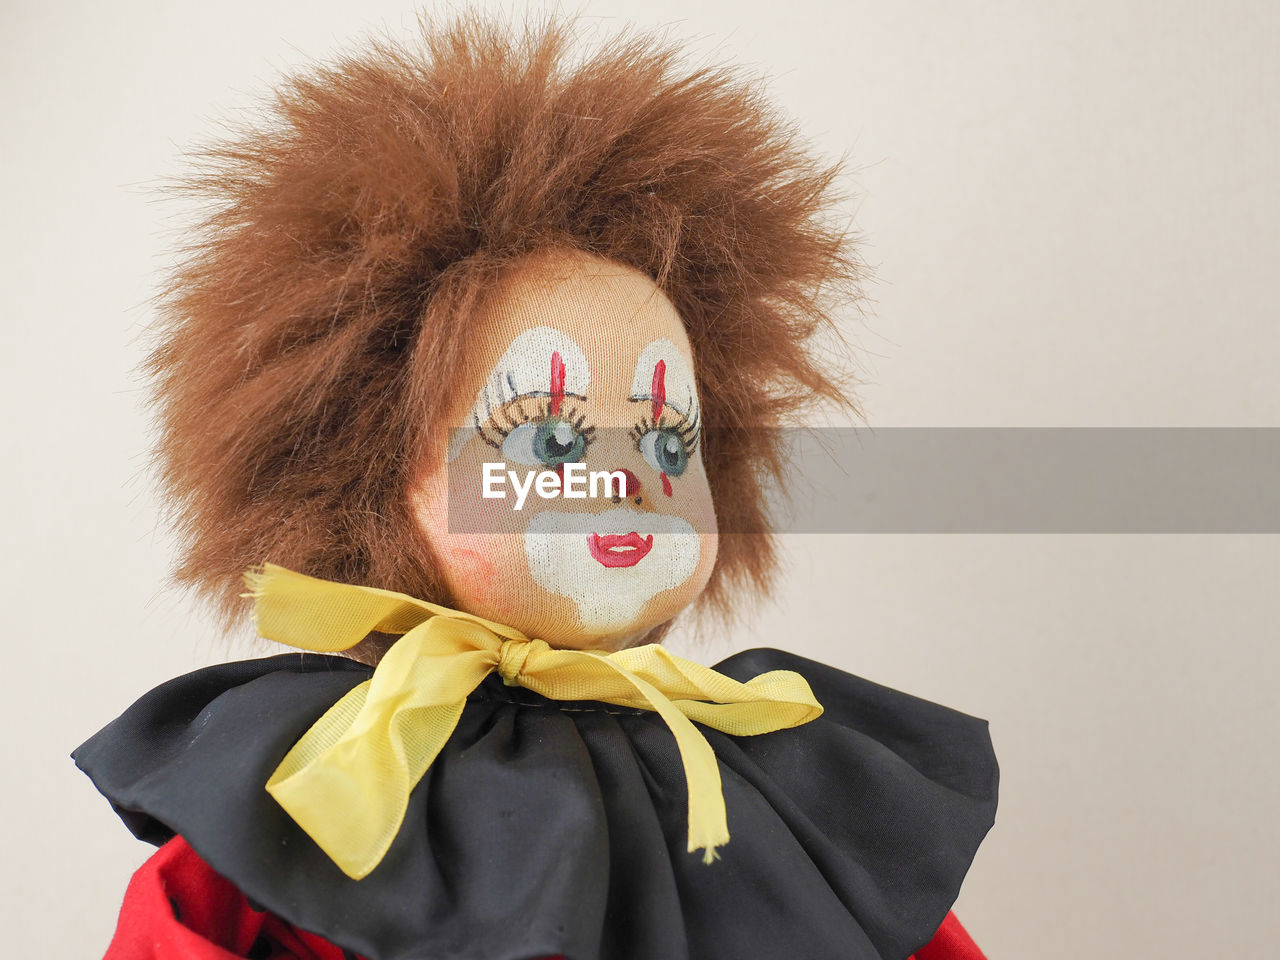 one person, portrait, studio shot, headshot, fun, disguise, clothing, costume, adult, women, childhood, child, red, hairstyle, mask, mask - disguise, emotion, indoors, smiling, looking at camera, humor, copy space, dressing up, yellow, human hair, human face, happiness, front view, redhead, female, wig